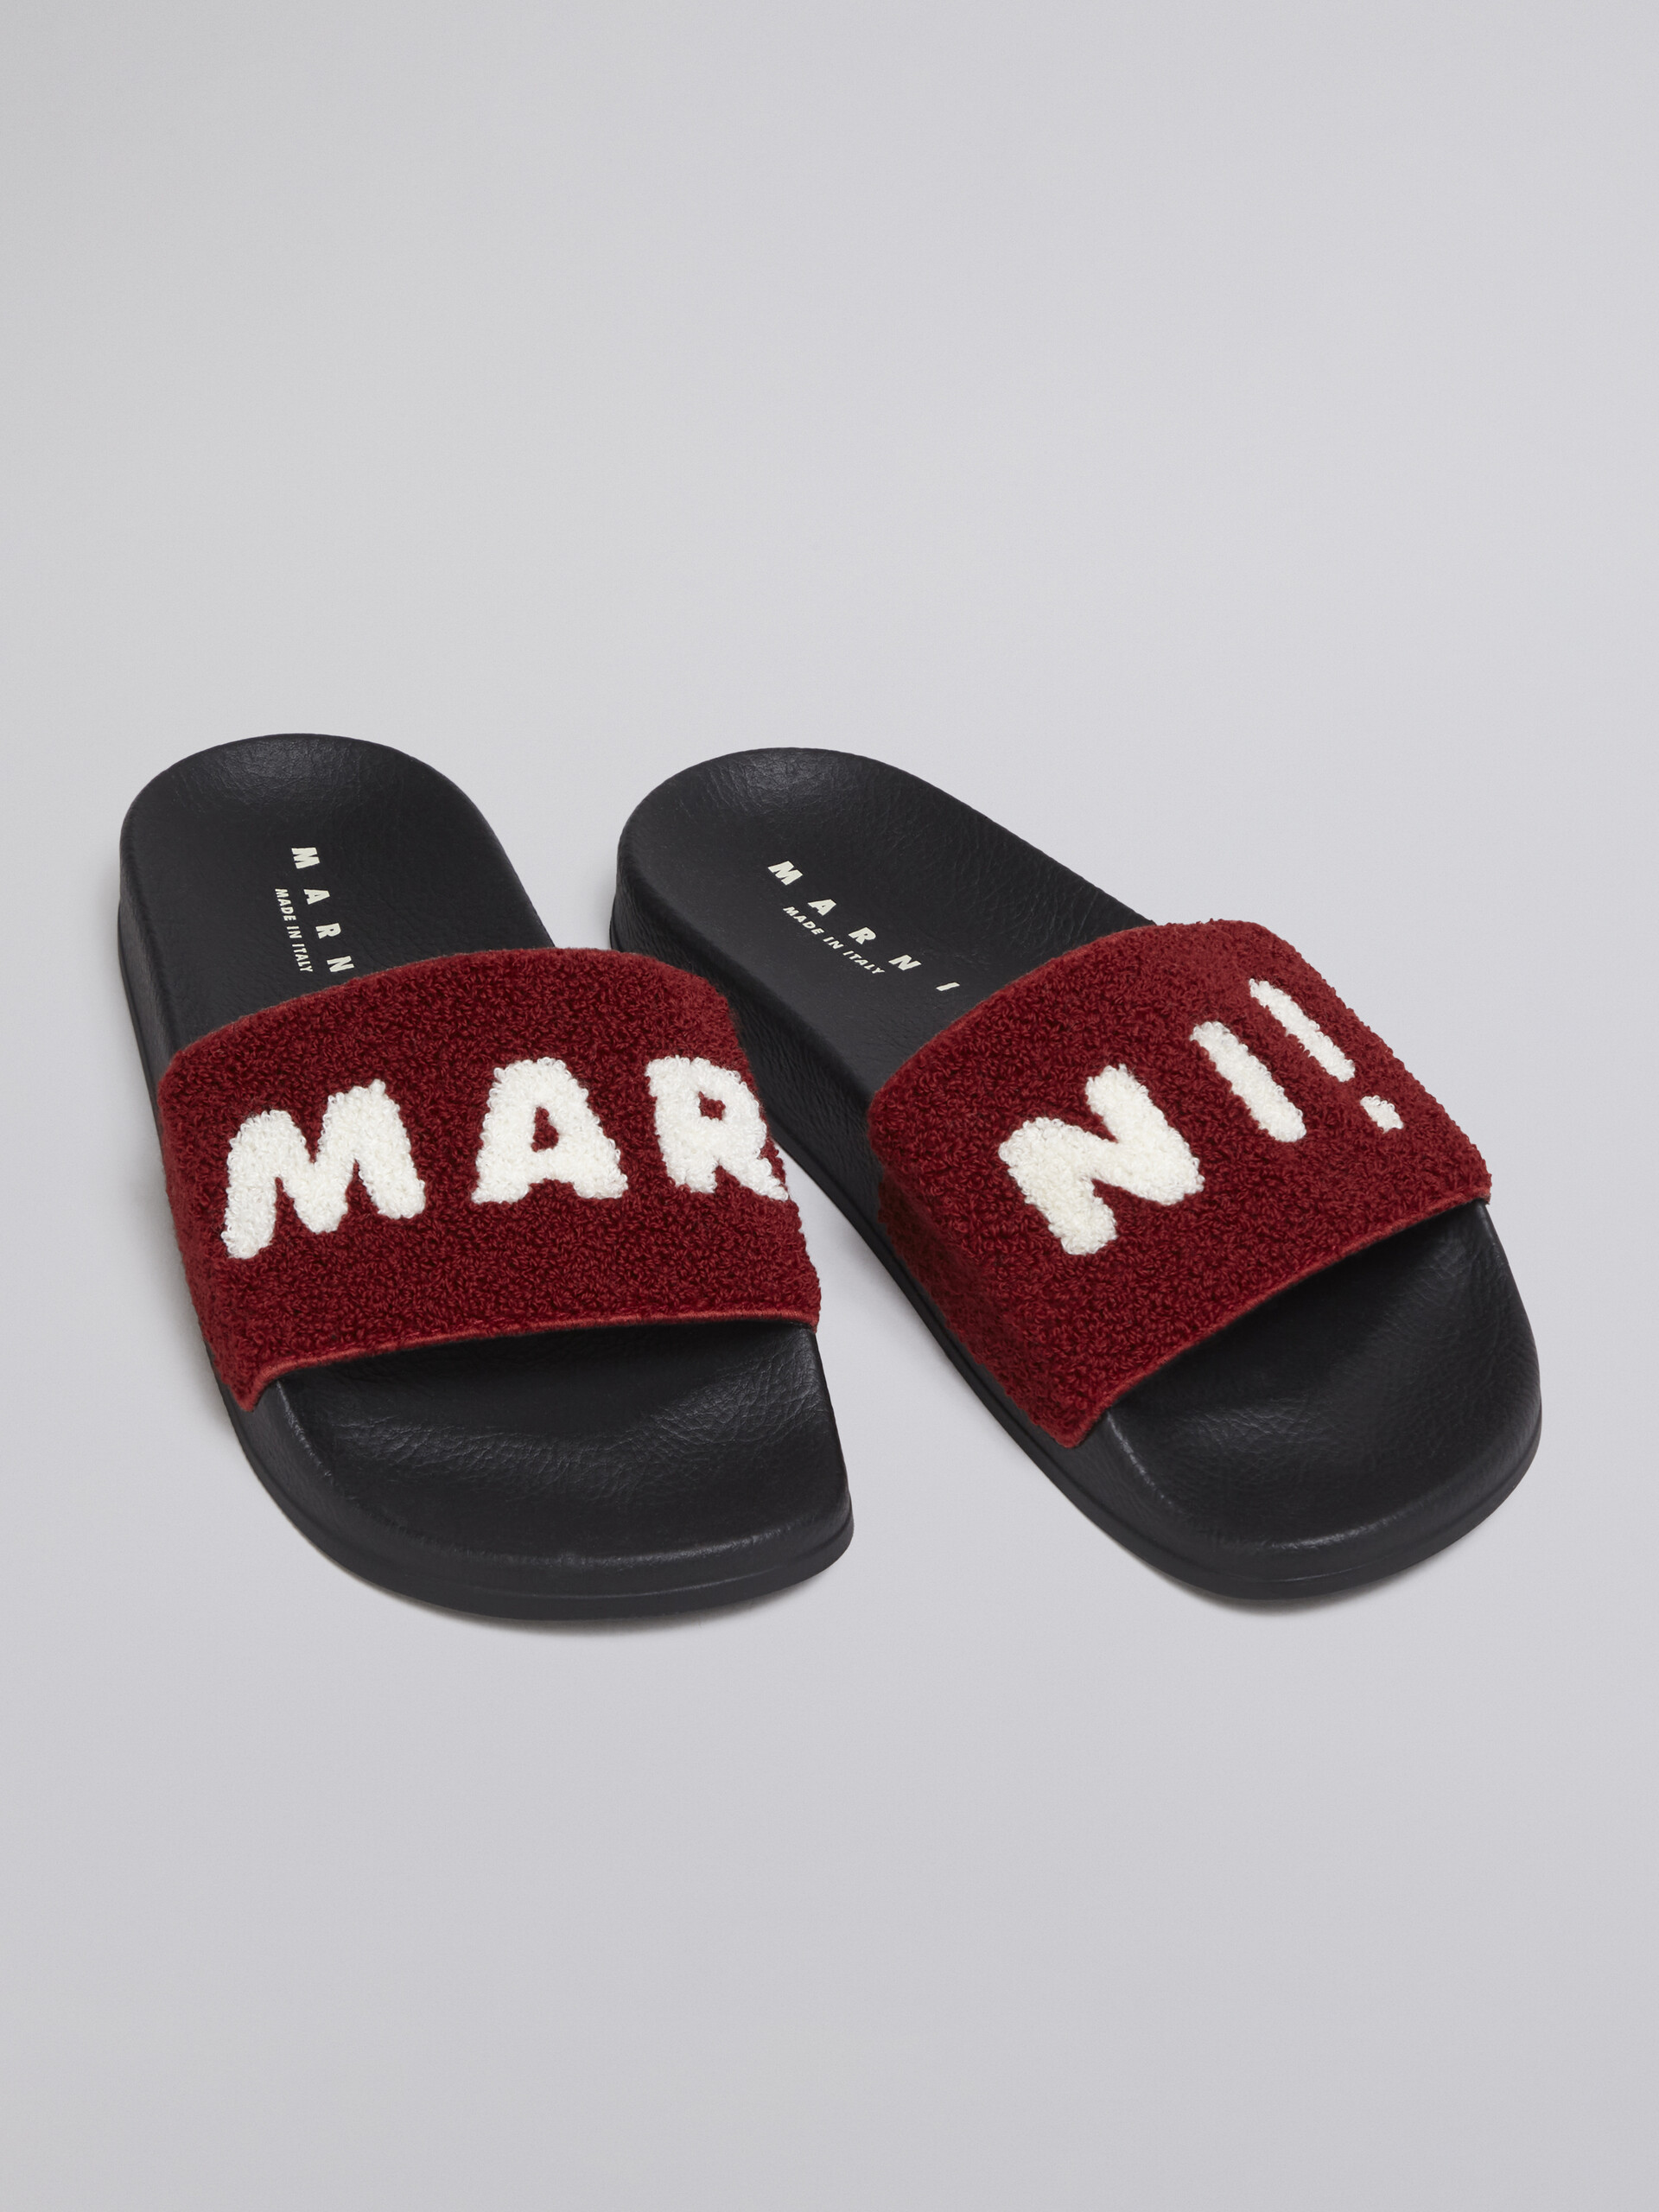 Rubber sandal with white and red terry-cloth band - Sandals - Image 5